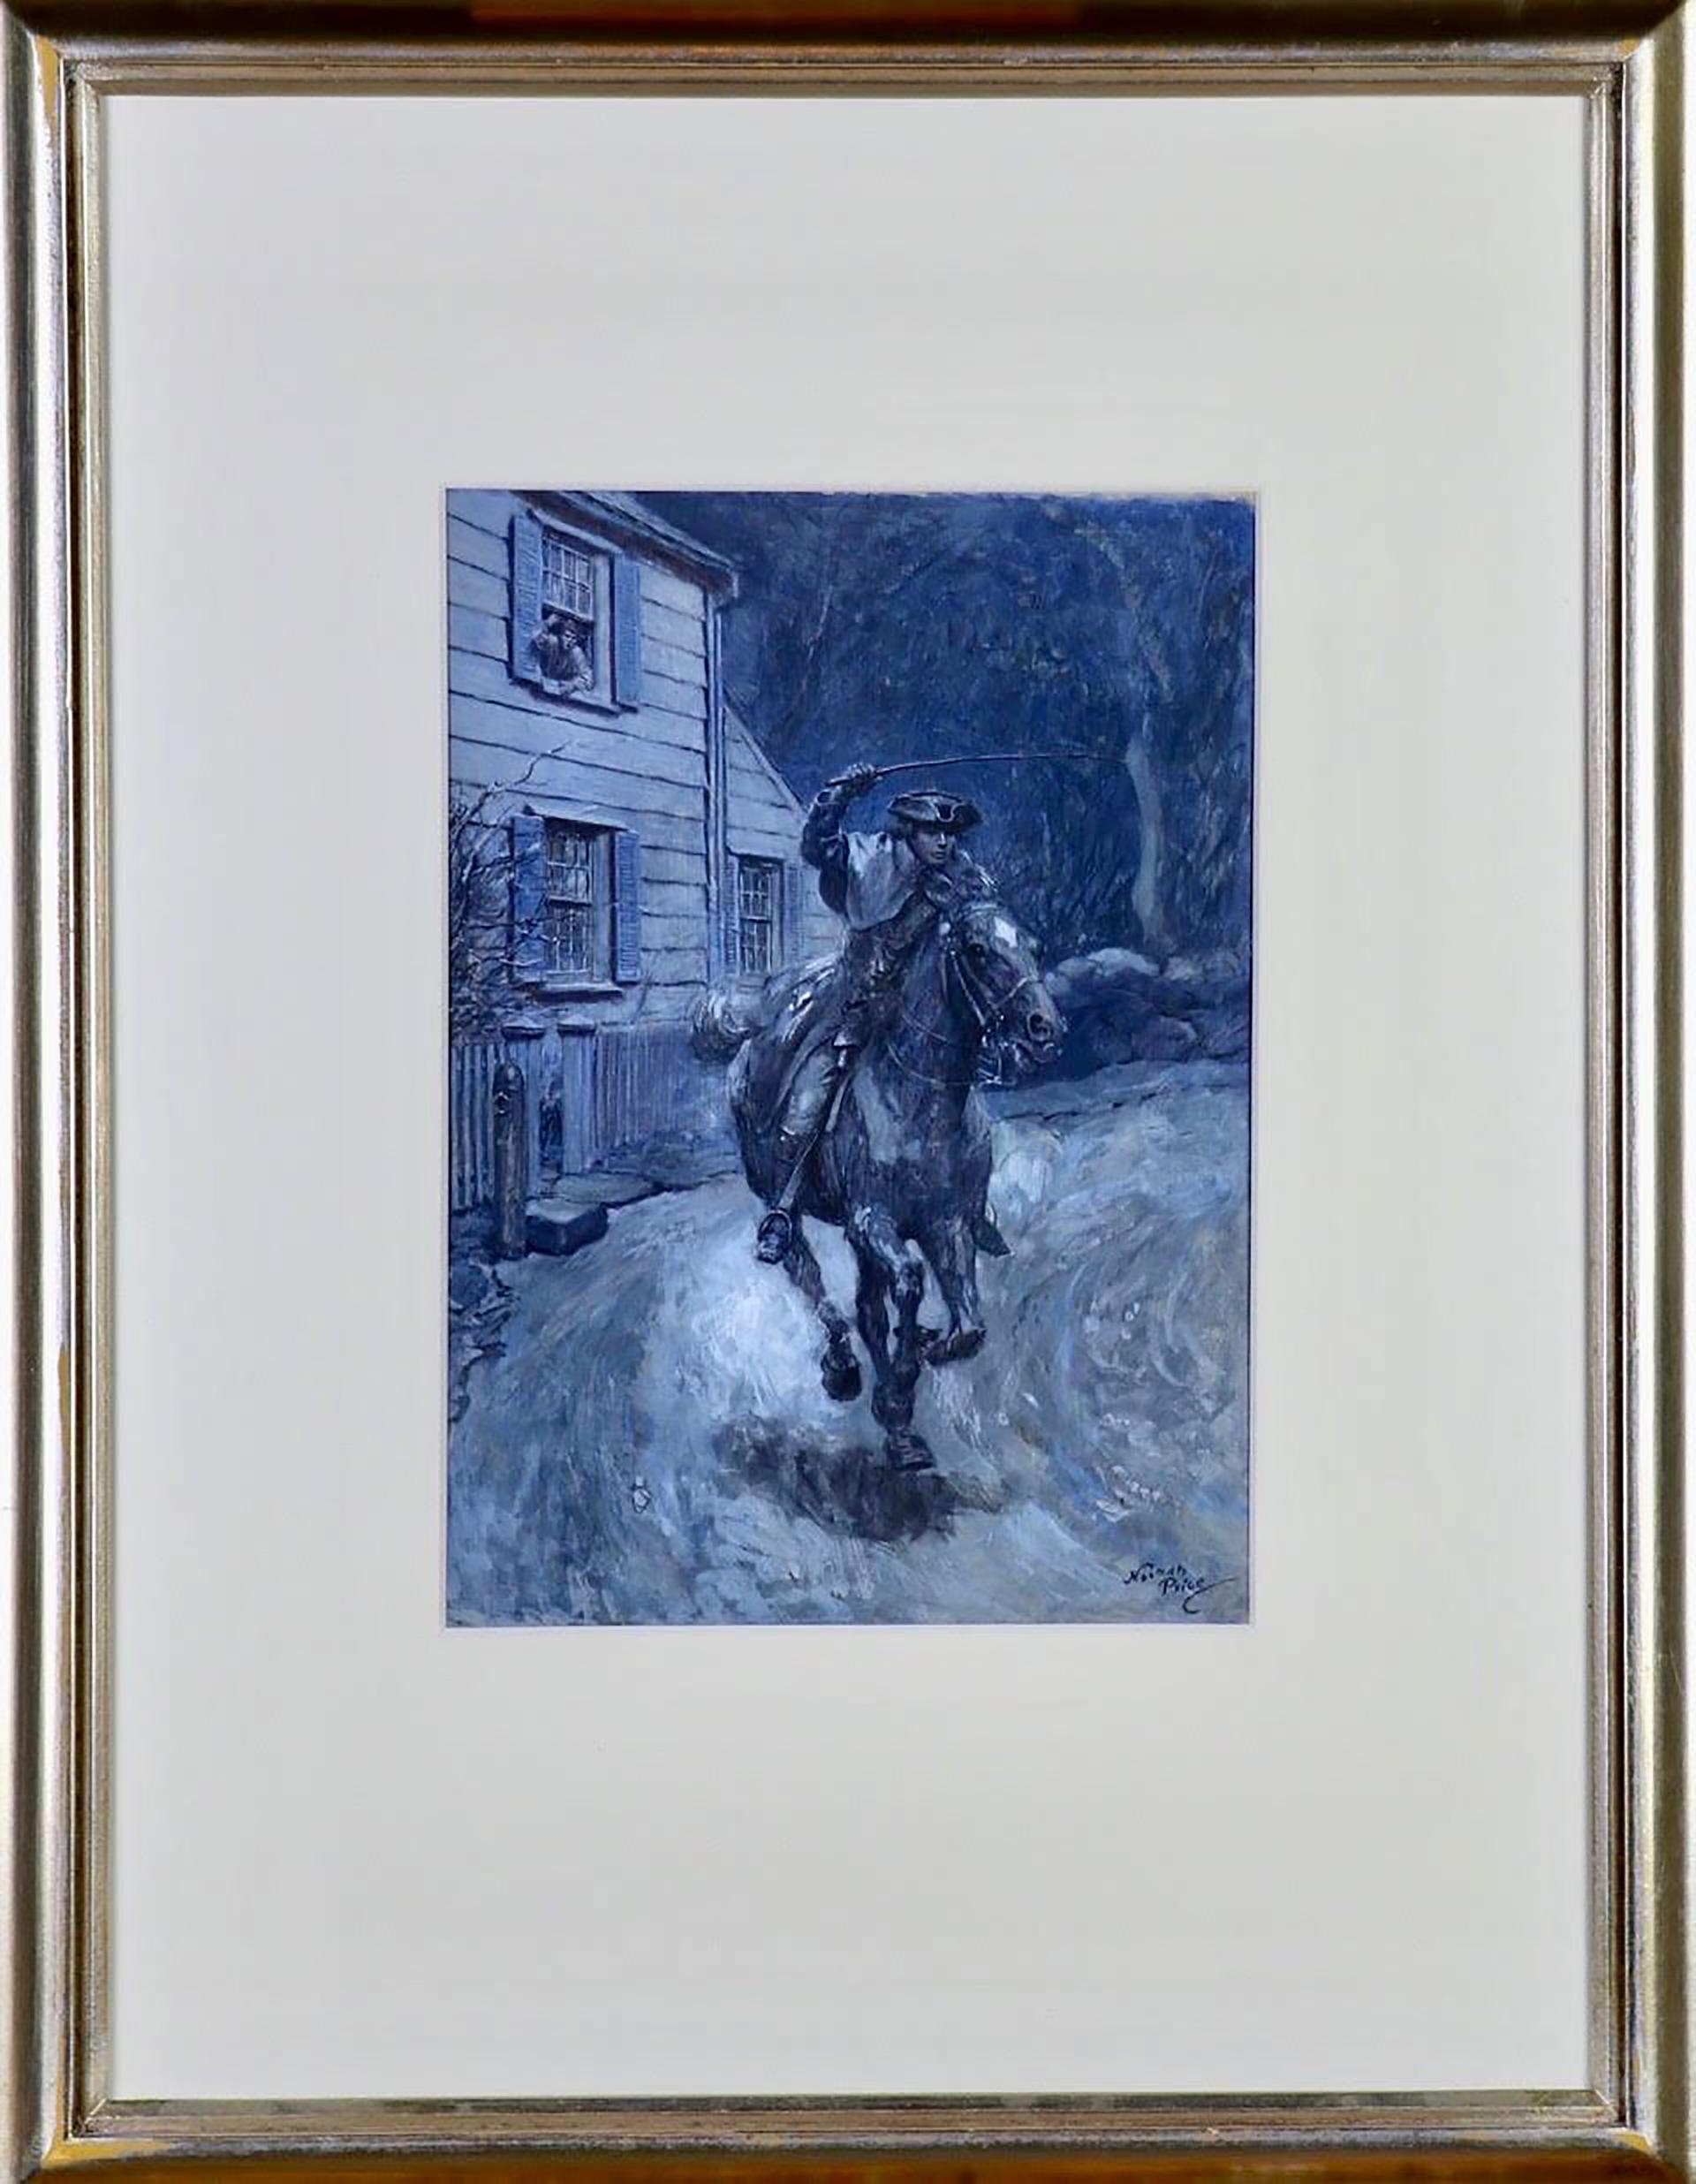 Paul Revere Riding on Horseback - Painting by Norman Price